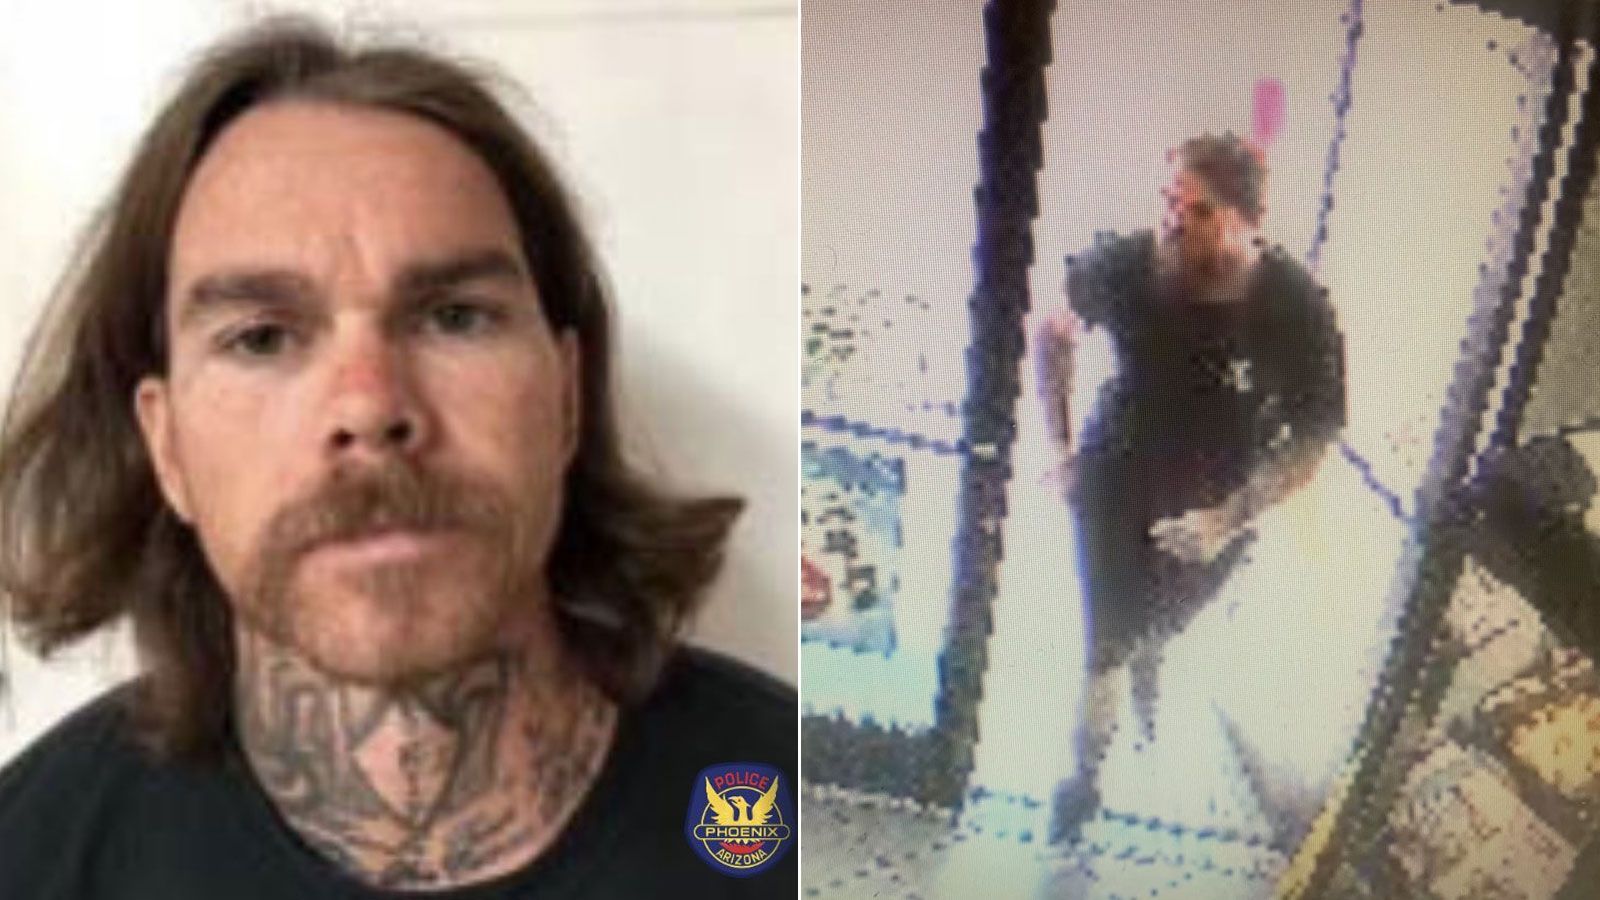 Man accused of shooting Phoenix officer taken into custody after 80-hour manhunt